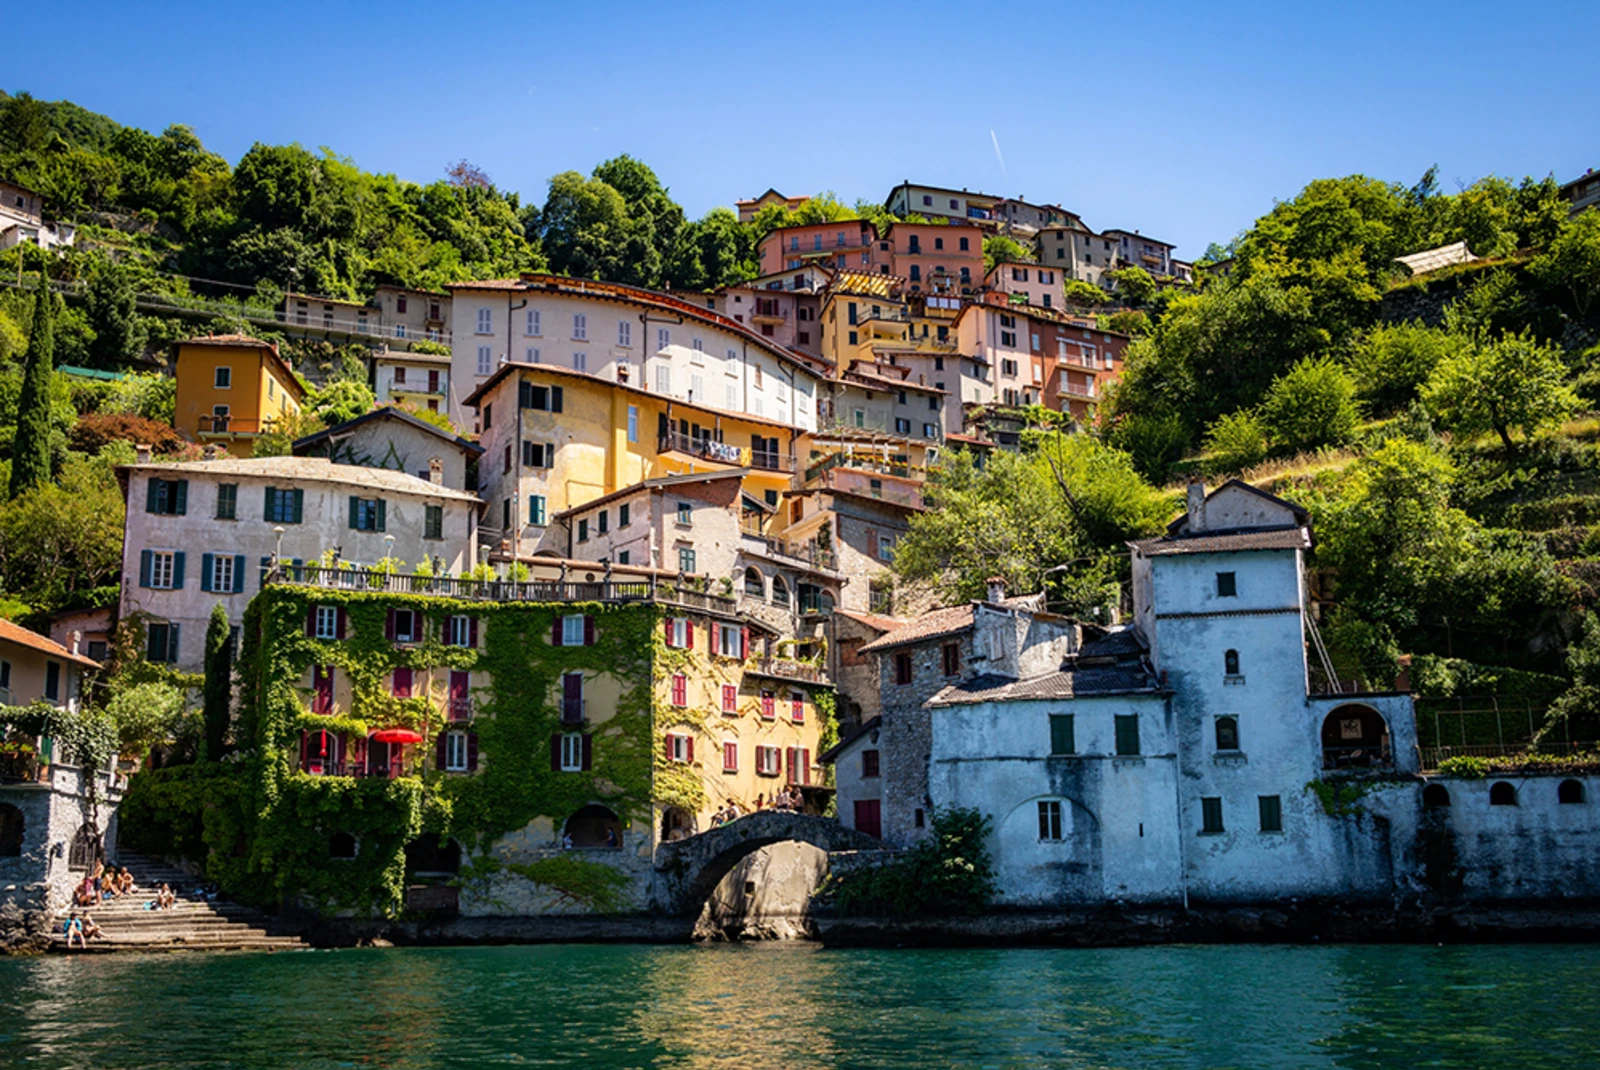 Family Trip to Italy: A 10-Day Itinerary - Day 8-10: Lake Como